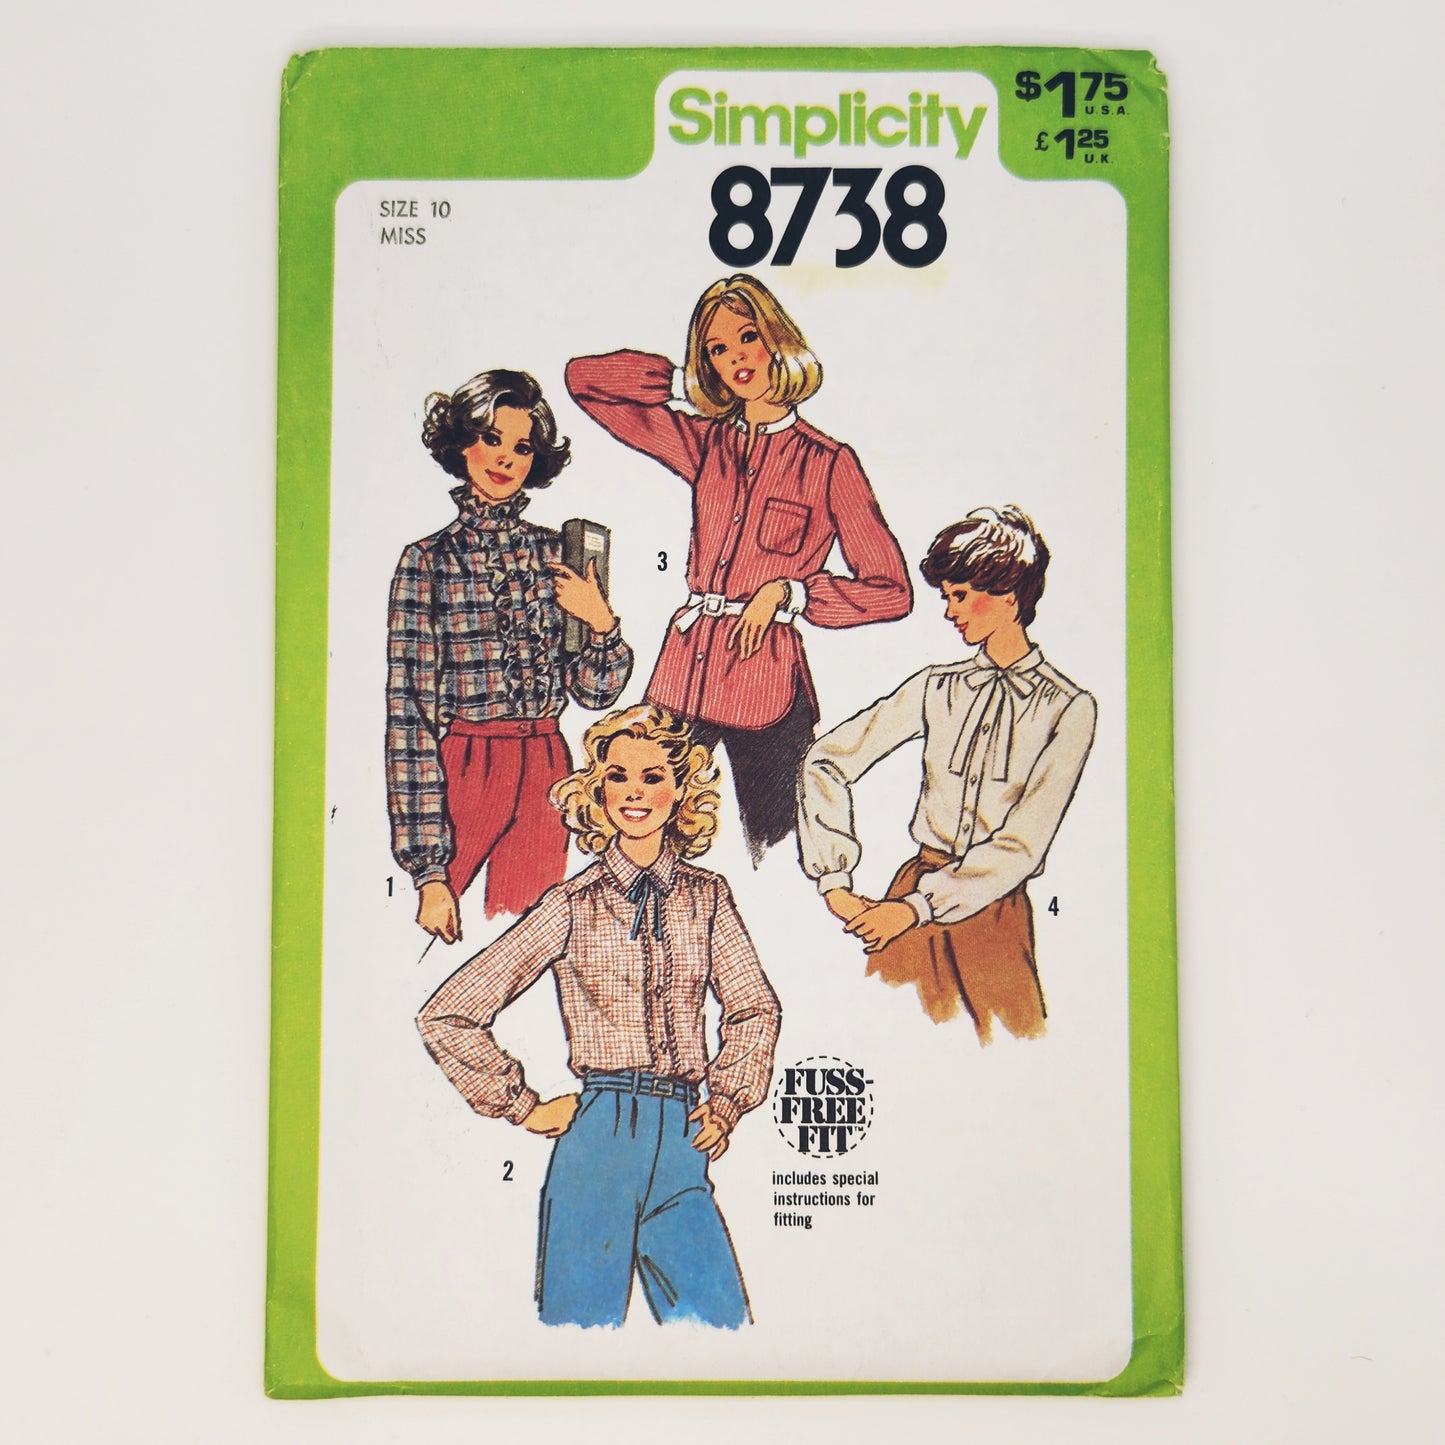 1978 Simplicity 8738 Sewing Pattern Misses Blouse Size 10